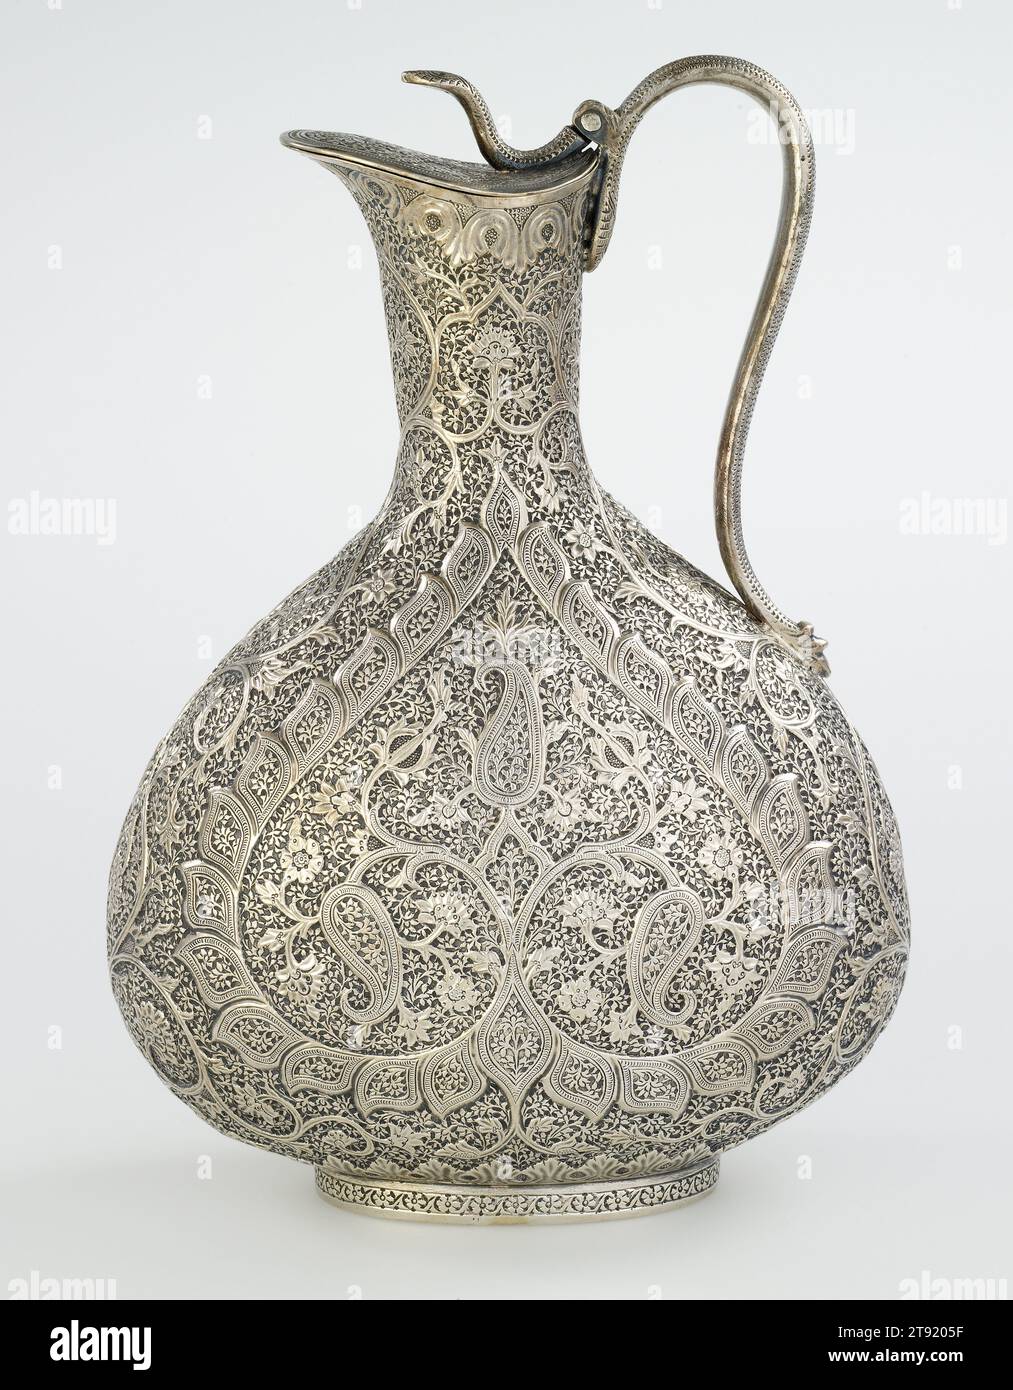 Claret Jug, c. 1890, 9 1/4 x 6 3/4 x 4 in. (23.5 x 17.15 x 10.16 cm), Silver, India, 19th century, This highly embellished jug for claret, a French red wine, is a testament to an Anglo-Indian aesthetic. This style proved fashionable among British officers based on the subcontinent, Anglophile Indians, as well as markets abroad. The jug’s central motif features a tree sprouting three elongated mangos, a shape known on the subcontinent as kunj. In Europe, this motif is better known as 'paisley,' after the Scottish city of Paisley Stock Photo